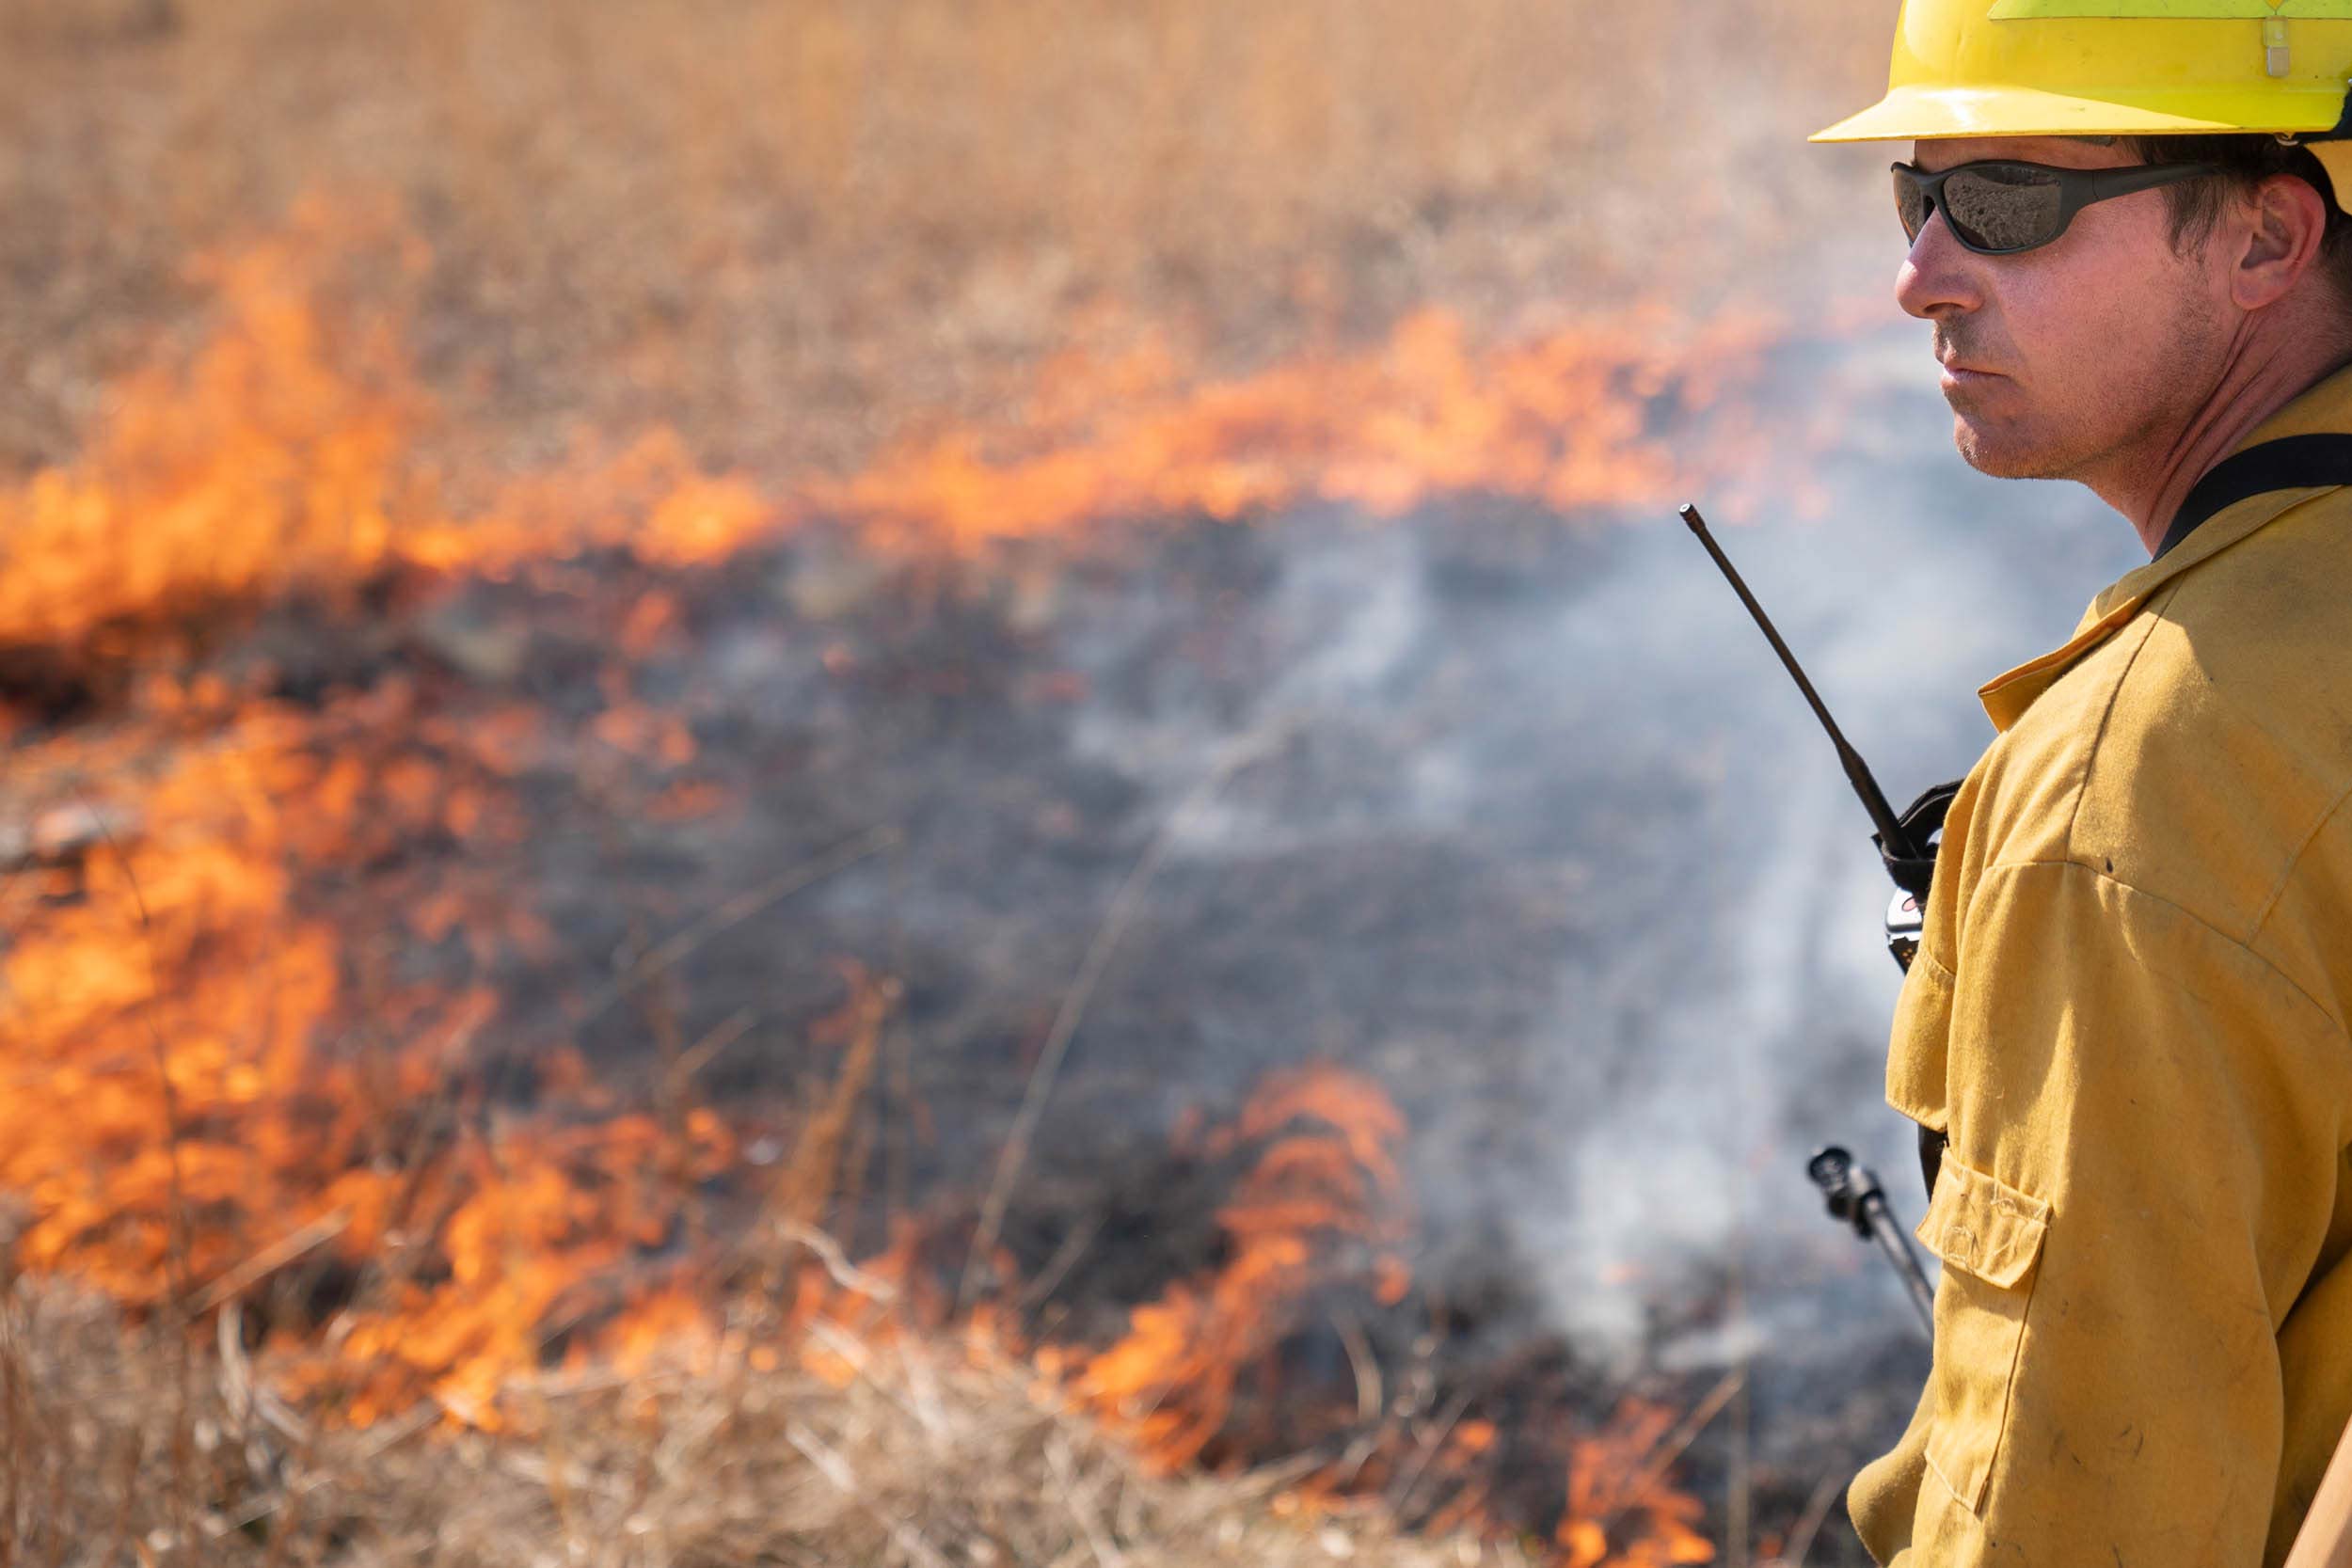 A man in a hard hat holds a walkie-talkie near a patch of burning thatch